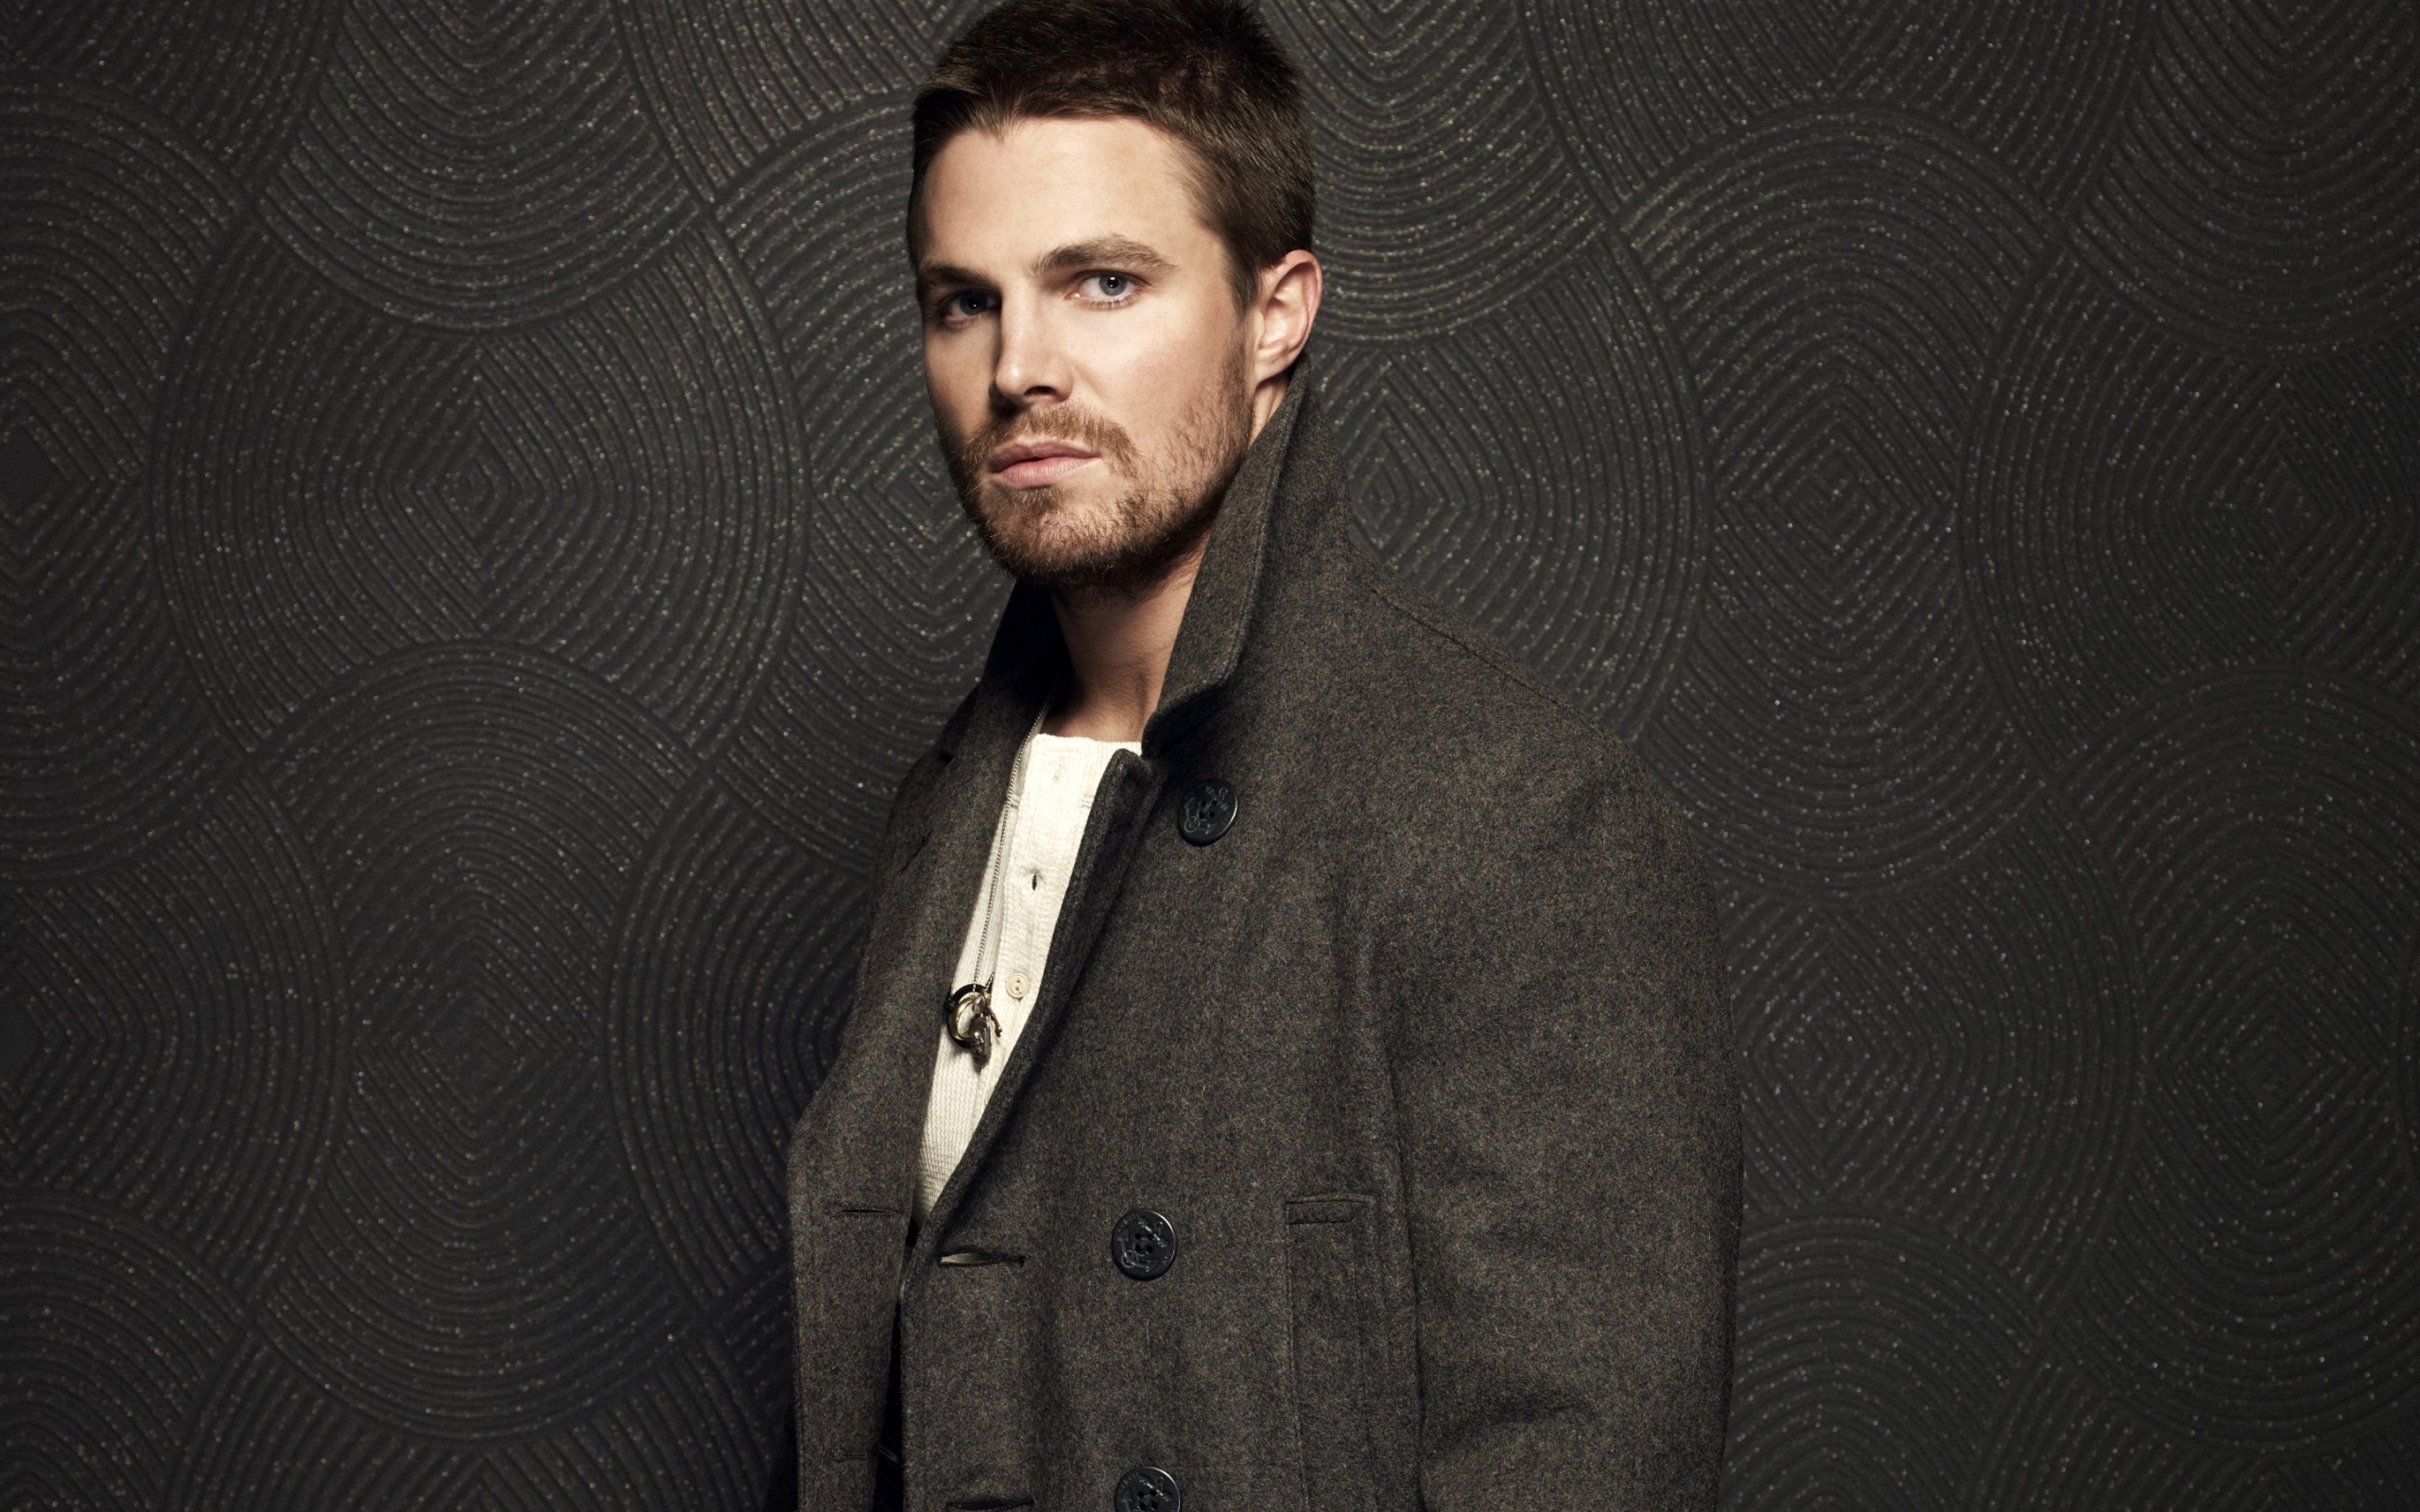 Stephen Amell for 2560 x 1600 widescreen resolution